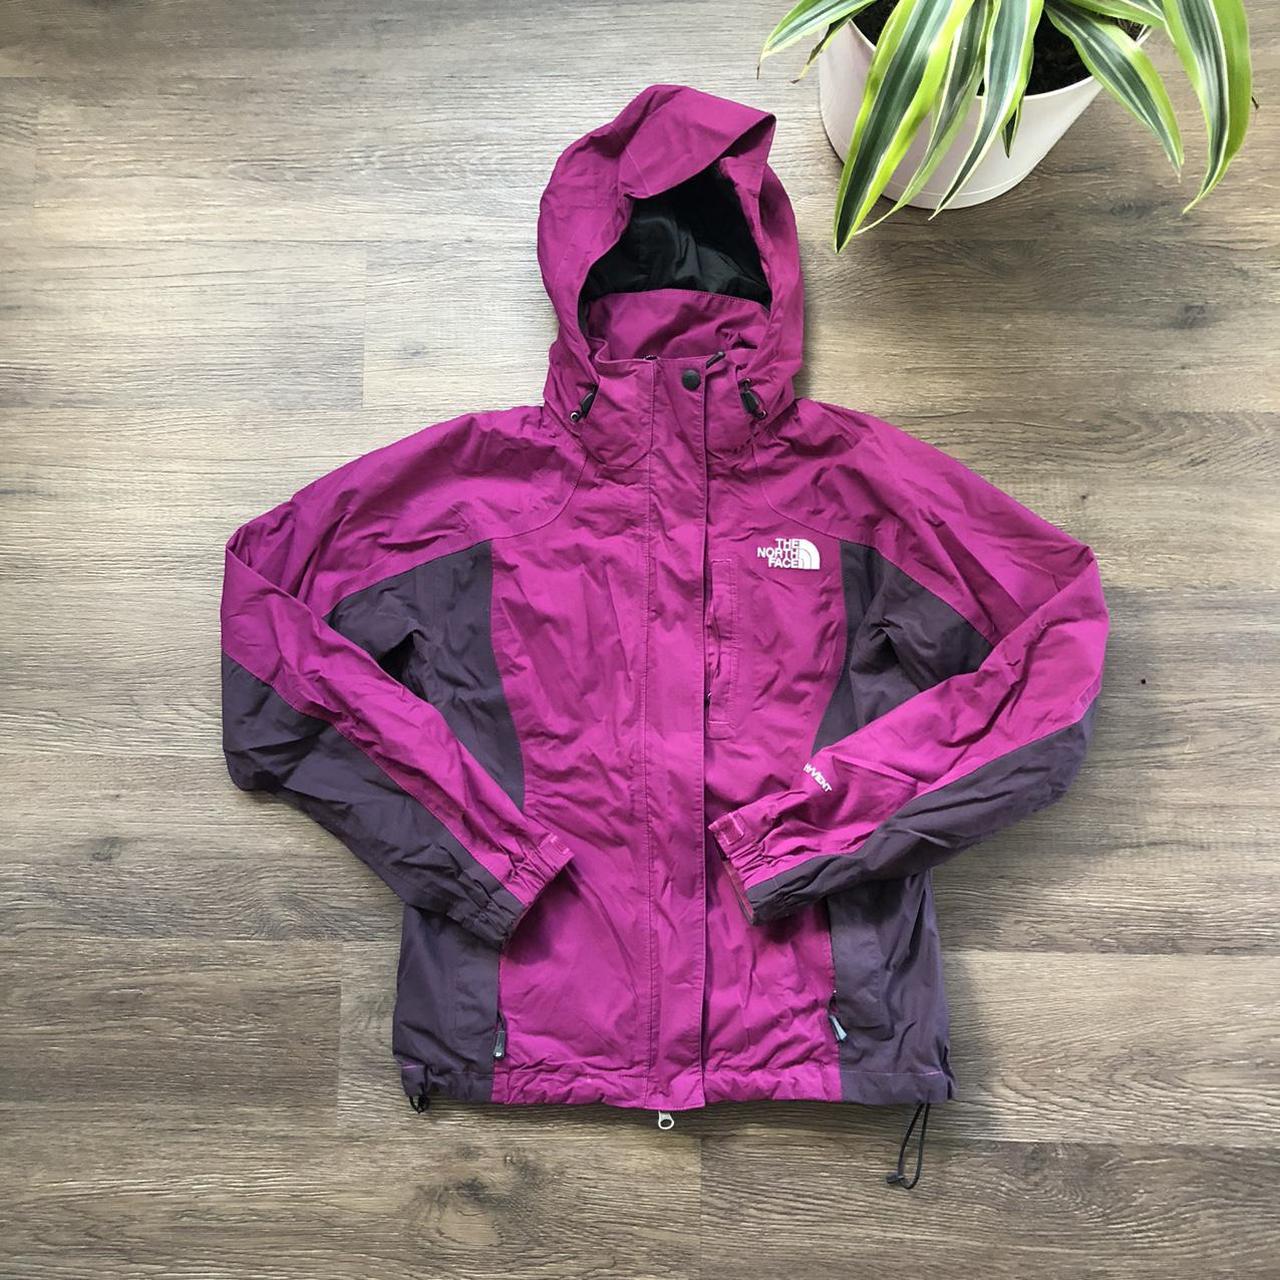 Product Image 1 - 🔥🏂WOMENS NORTH FACE SNOW JACKET🏂🔥
-Nice